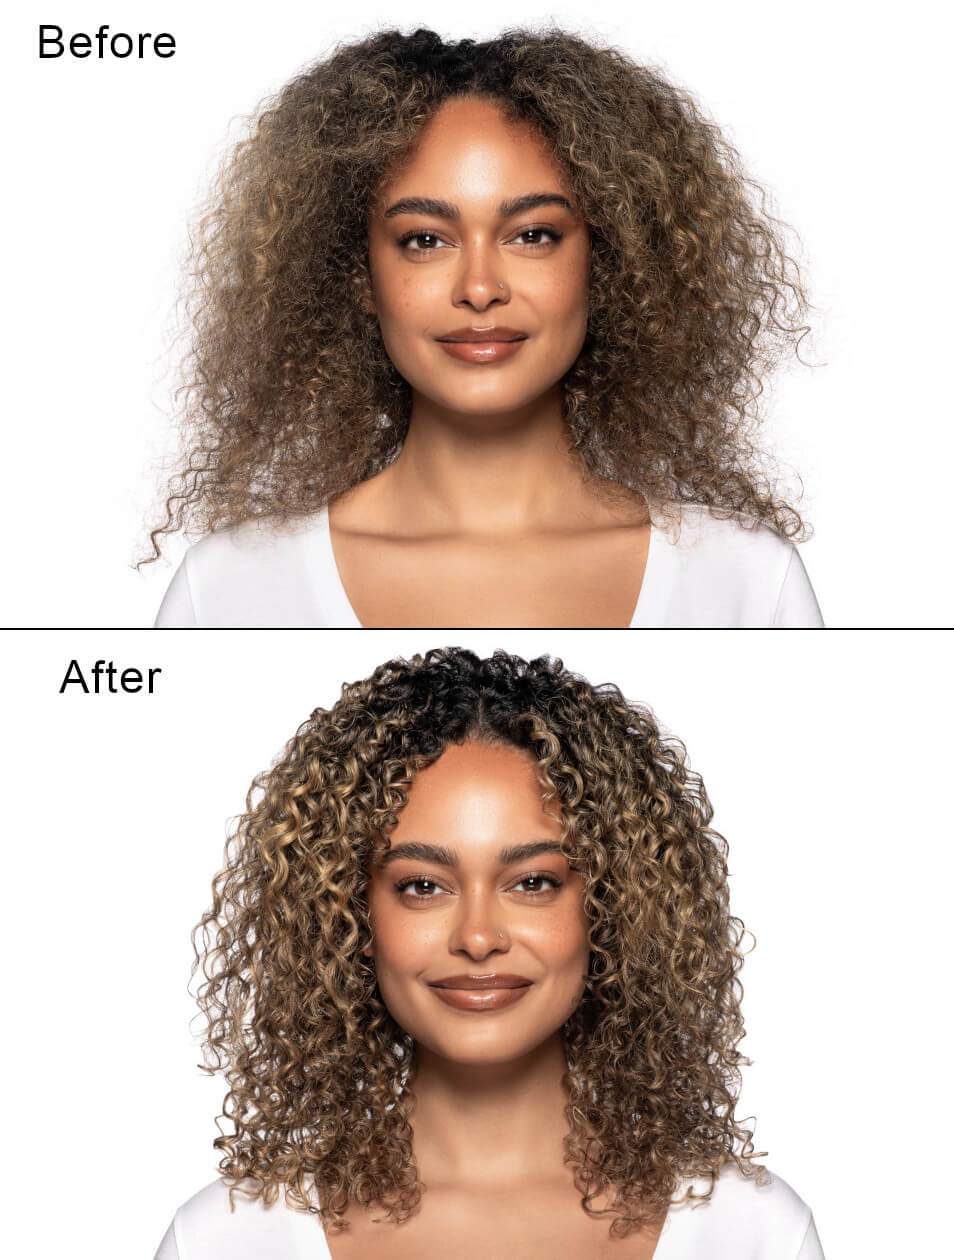 before and after strengthen hair model